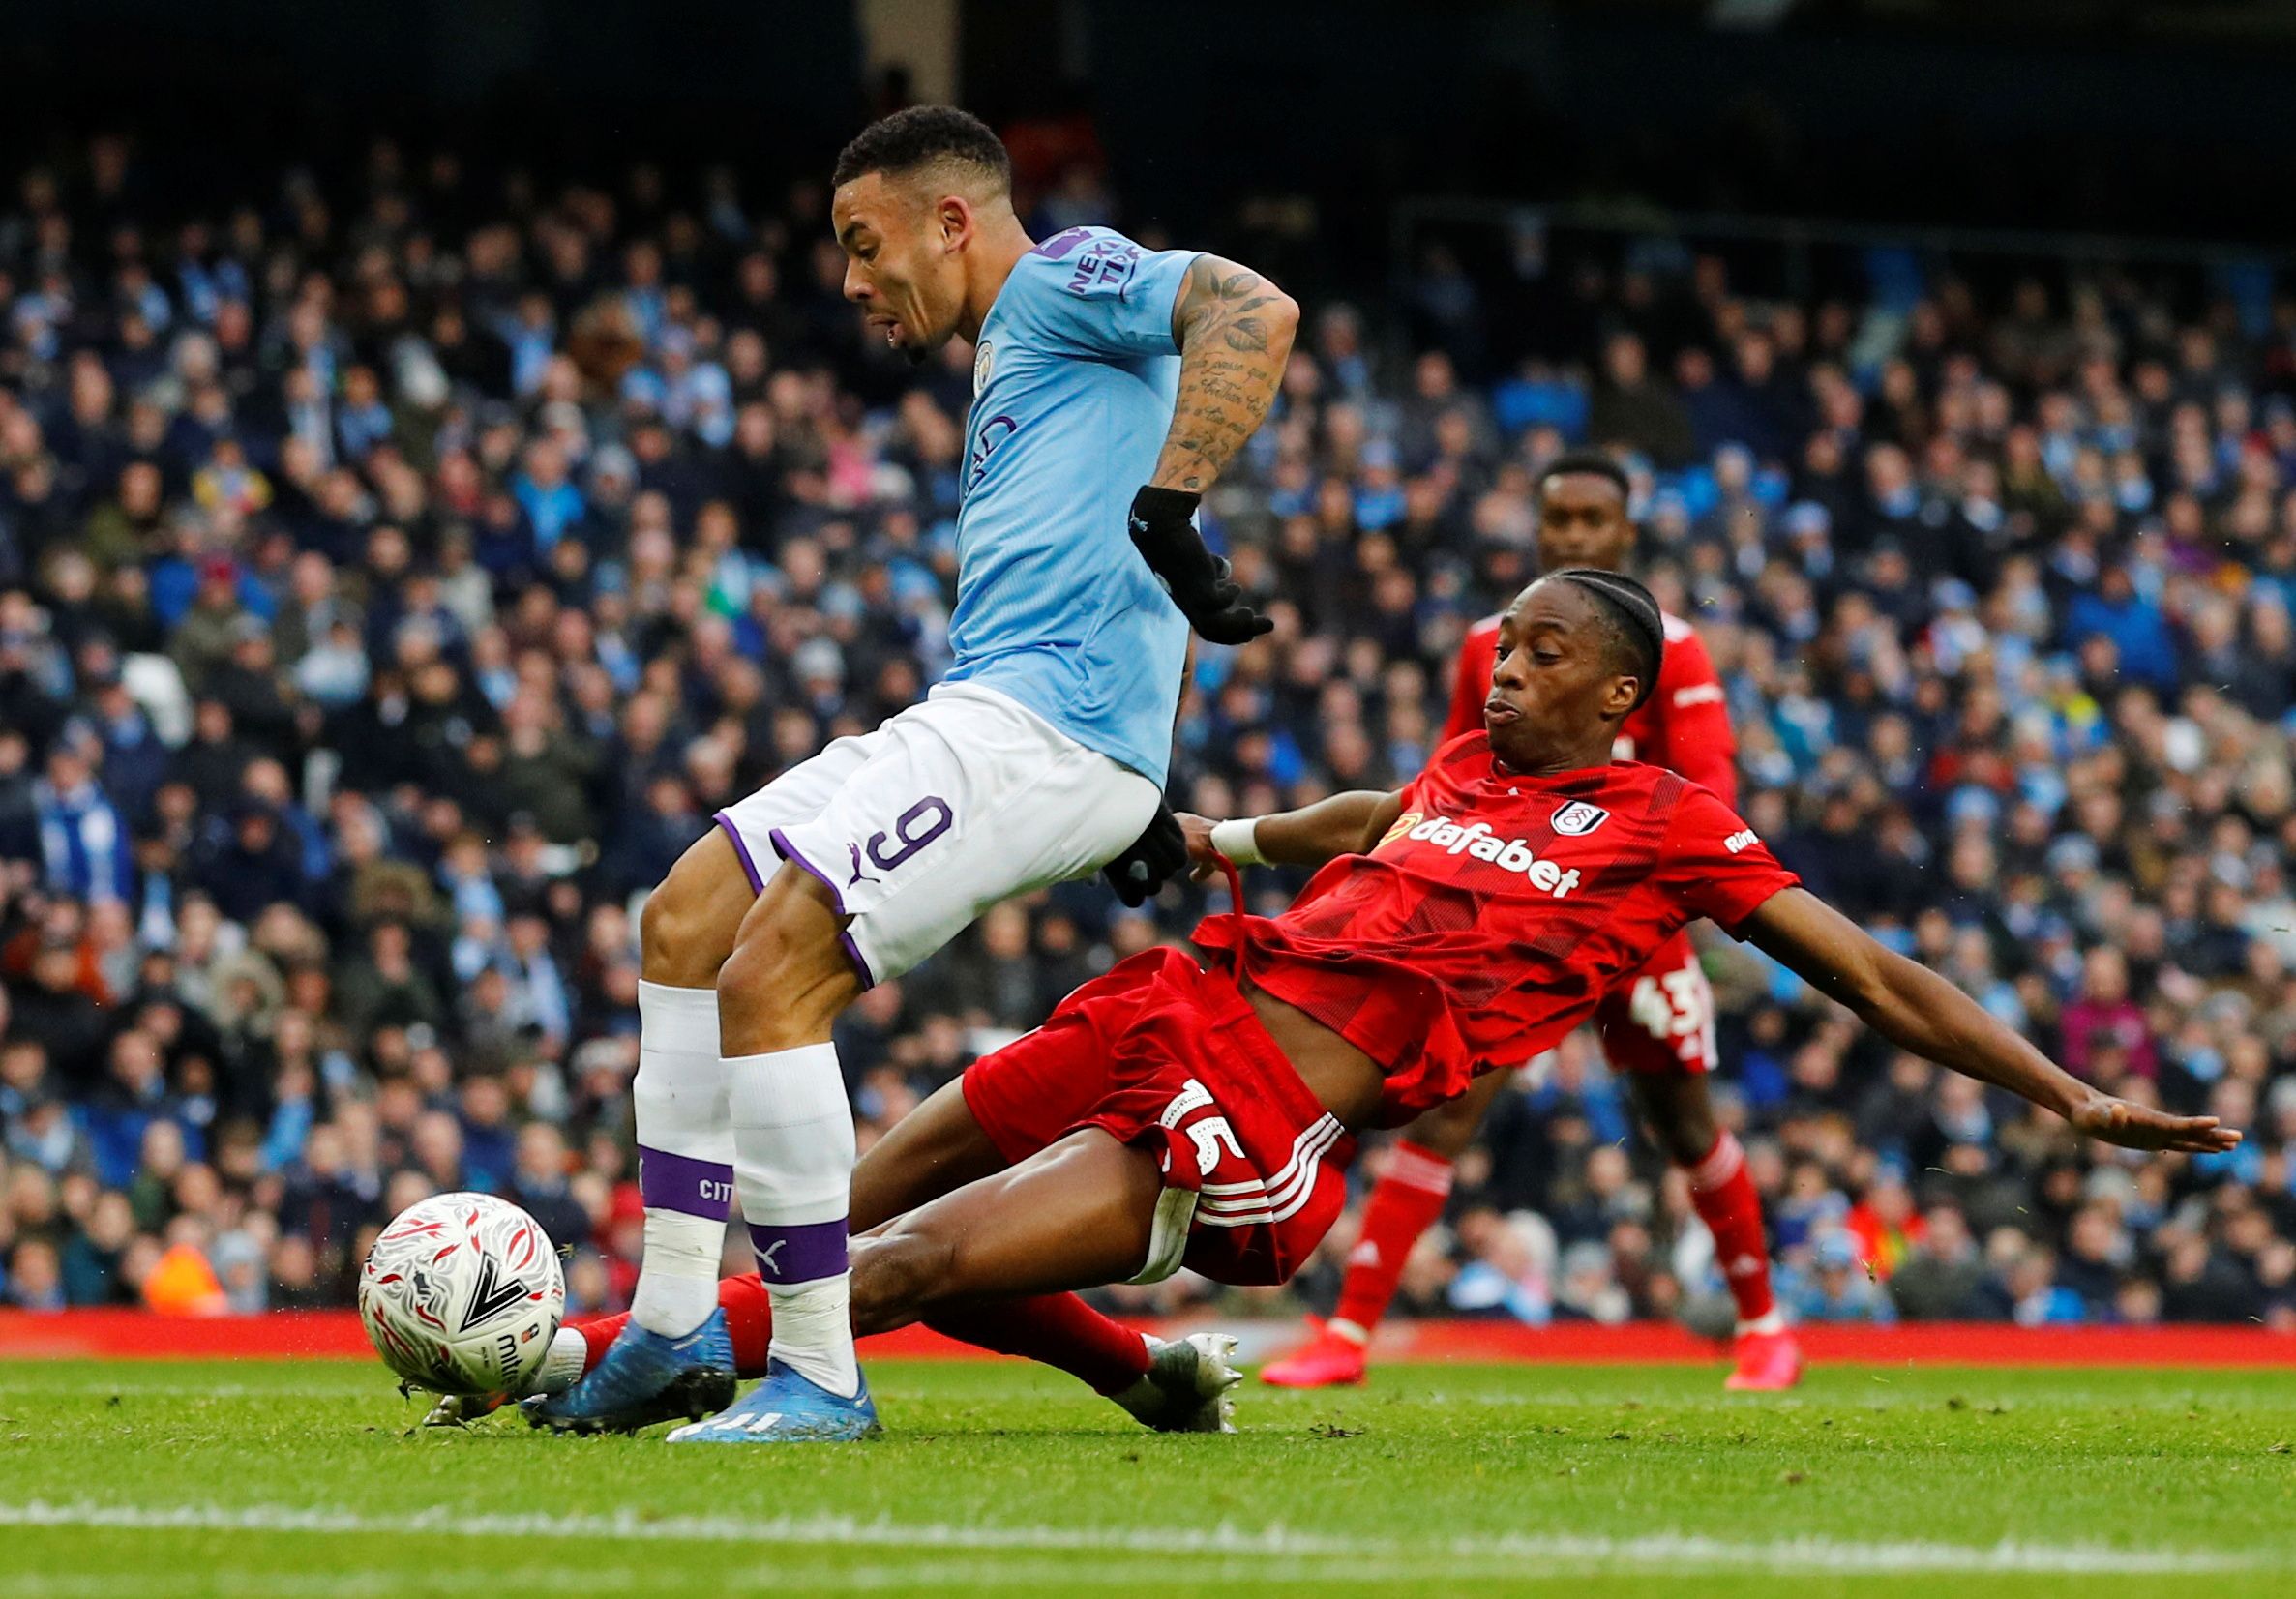 Soccer Football - FA Cup Fourth Round - Manchester City v Fulham - Etihad Stadium, Manchester, Britain - January 26, 2020  Manchester City's Gabriel Jesus in action with Fulham's Terence Kongolo  REUTERS/Phil Noble